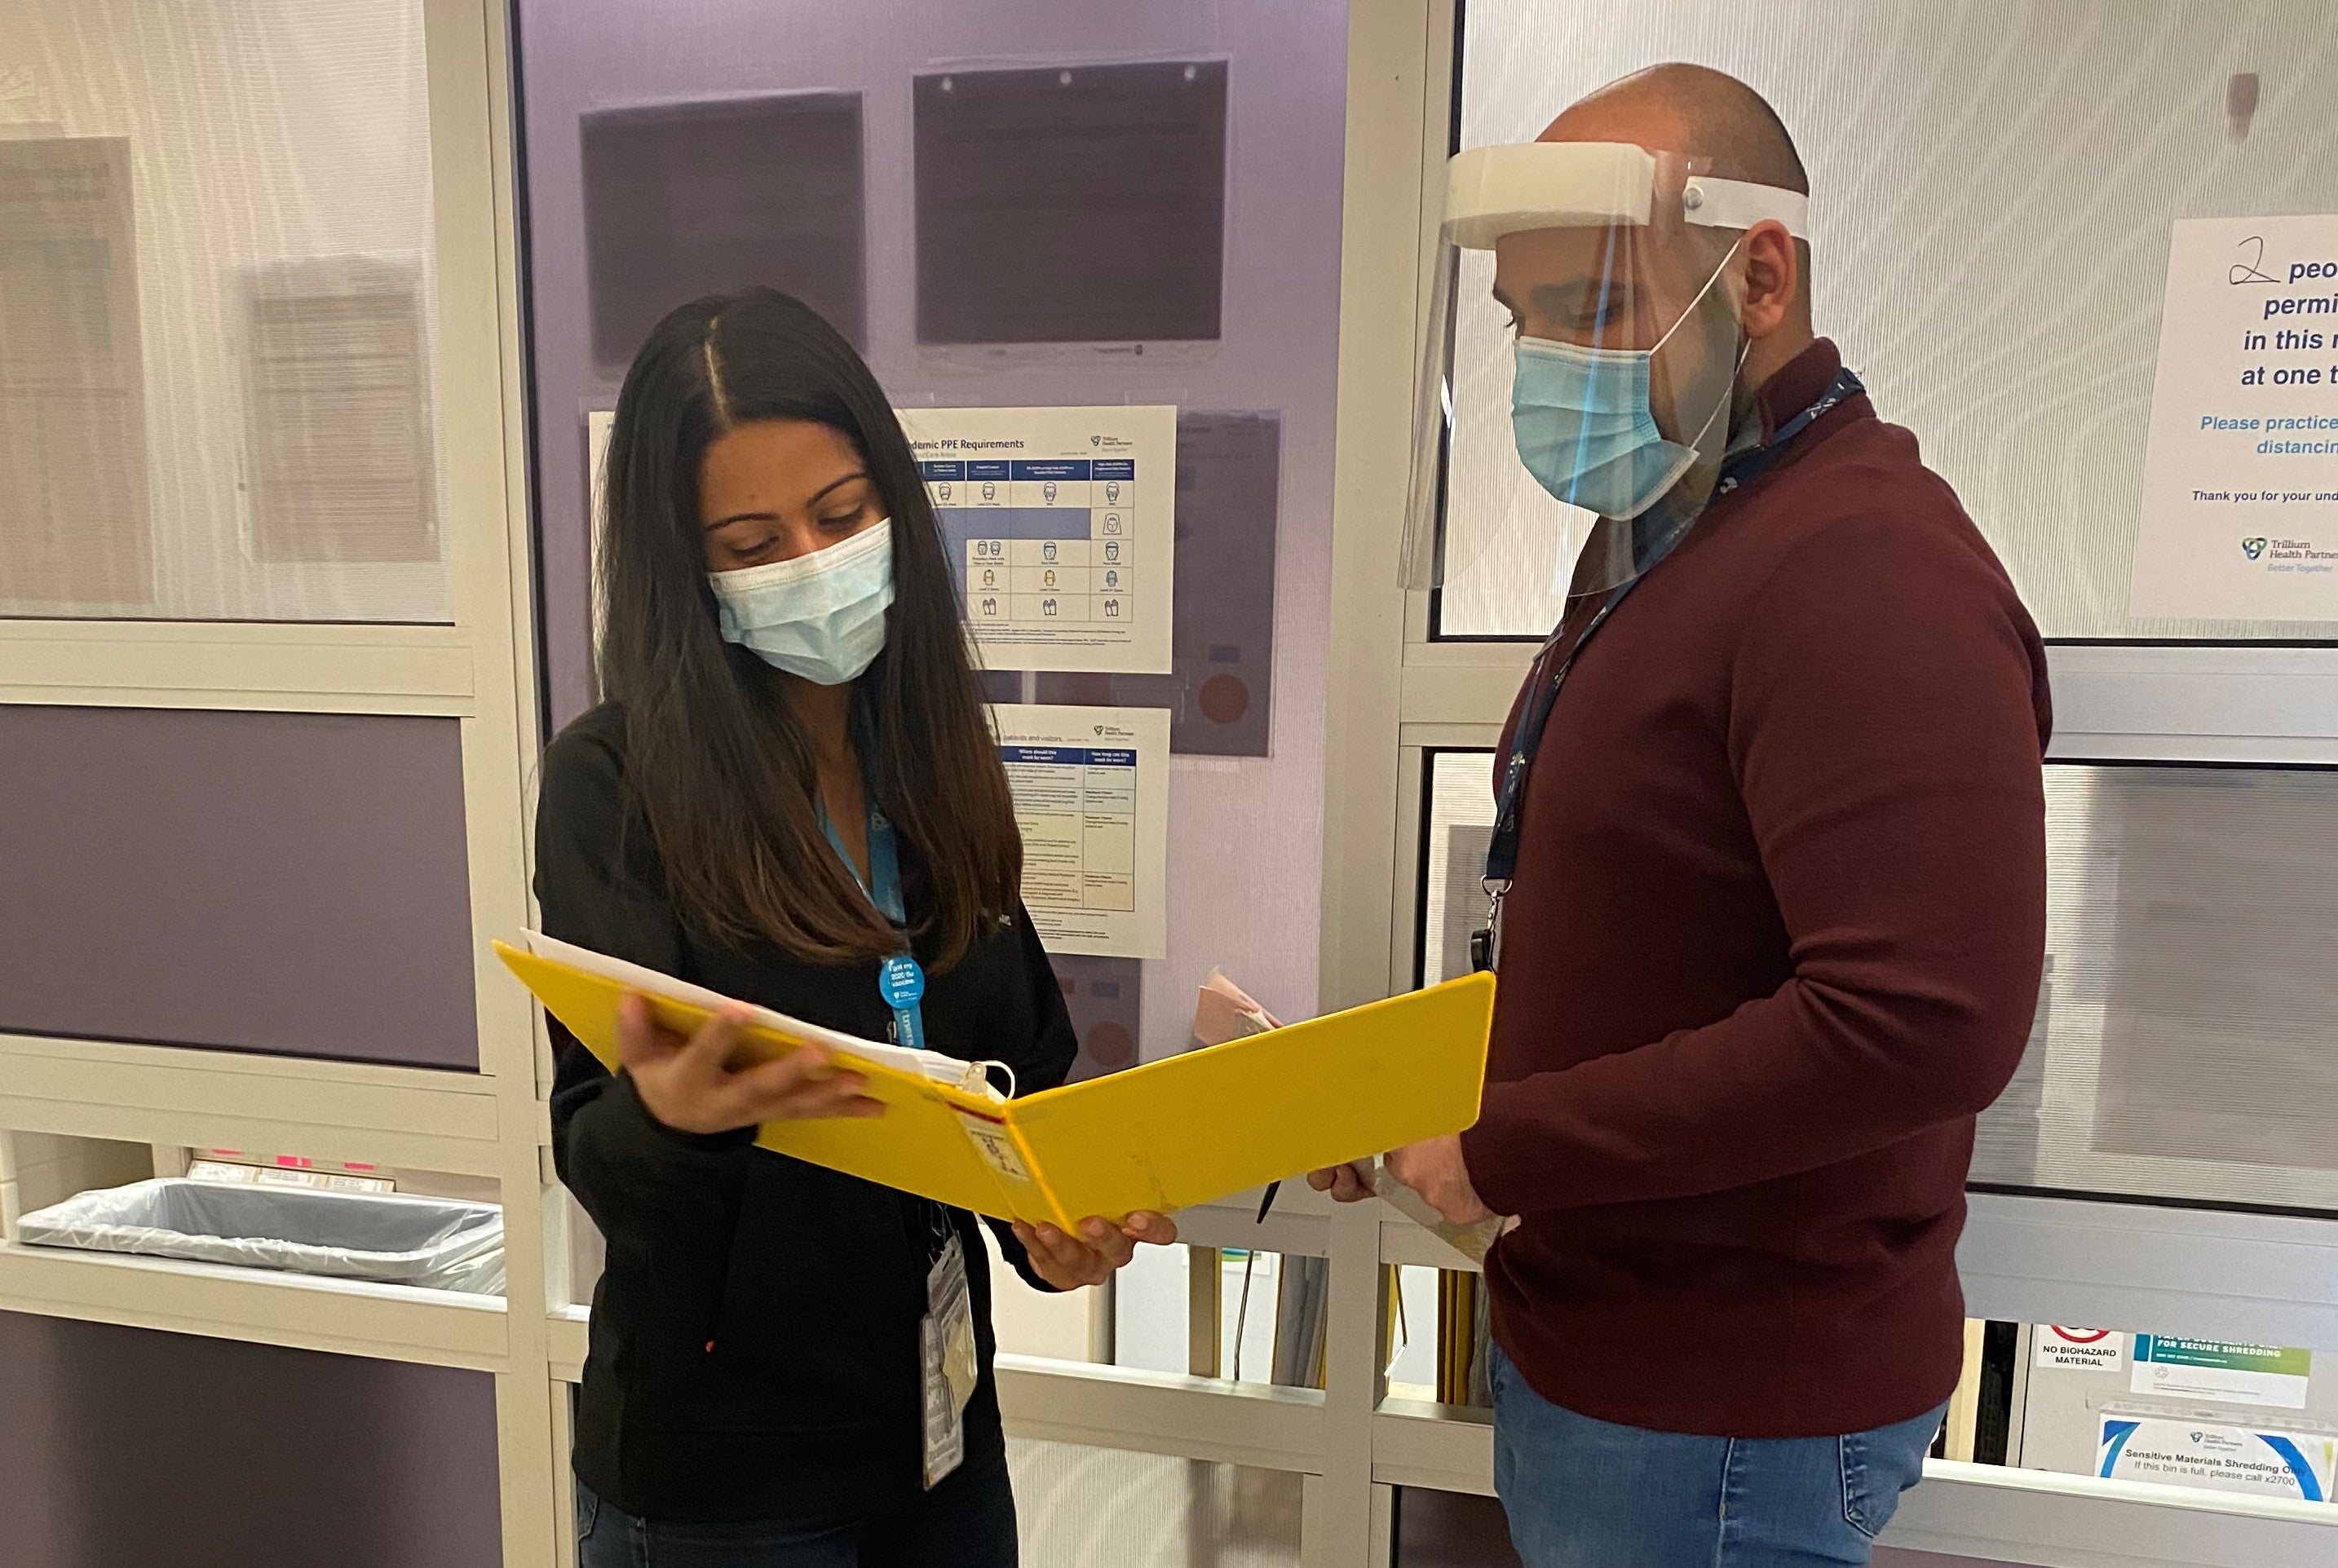 Amanda and a colleague wearing masks and studying a binder